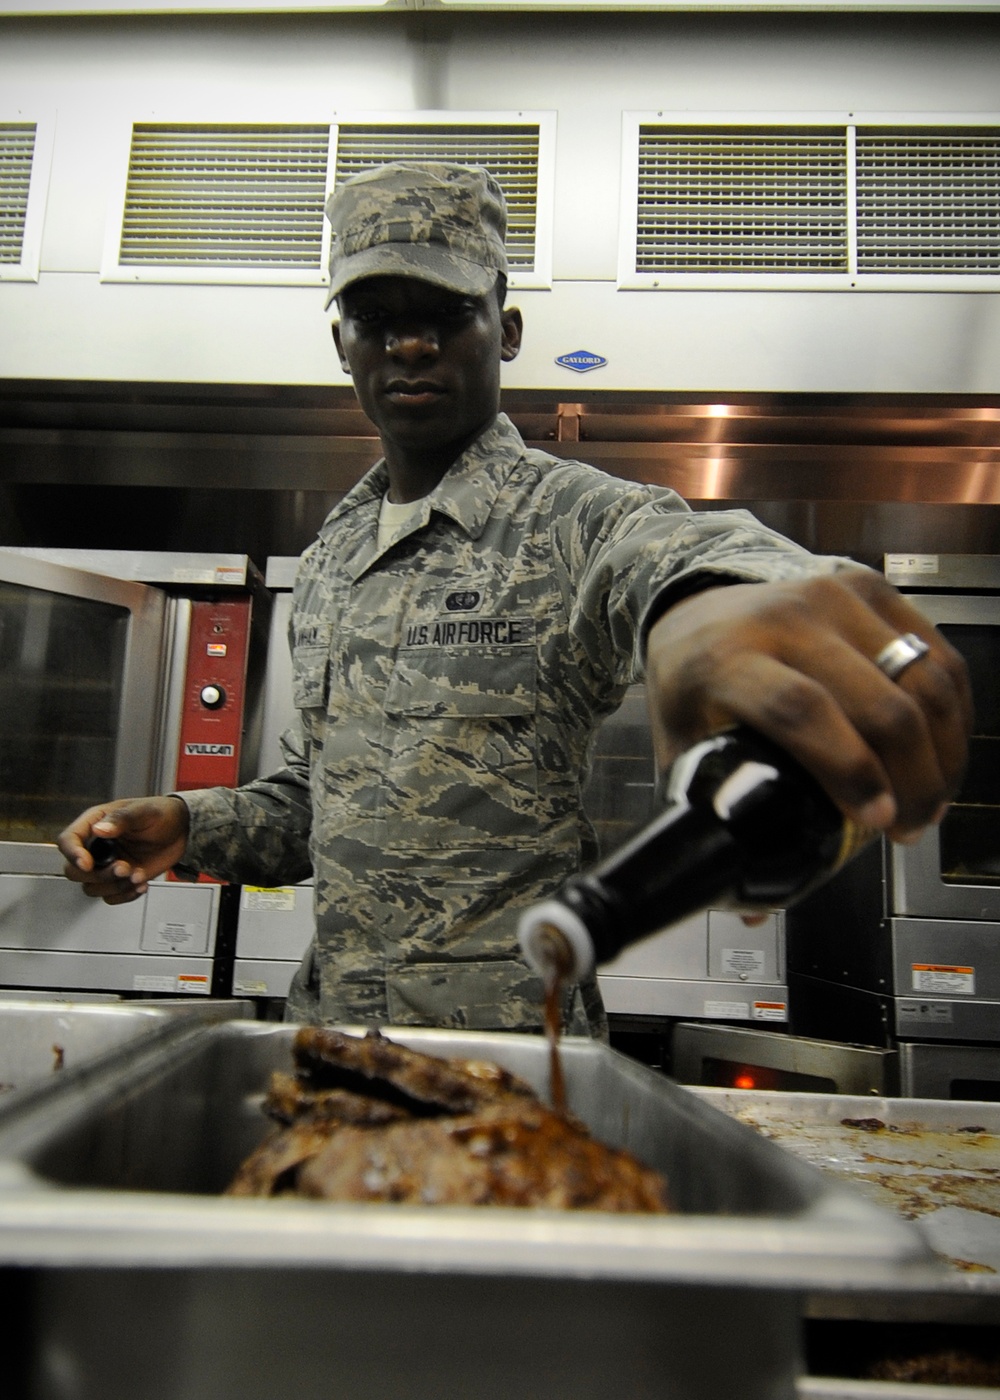 Dishing out energy: DFAC 'fuels' the flag